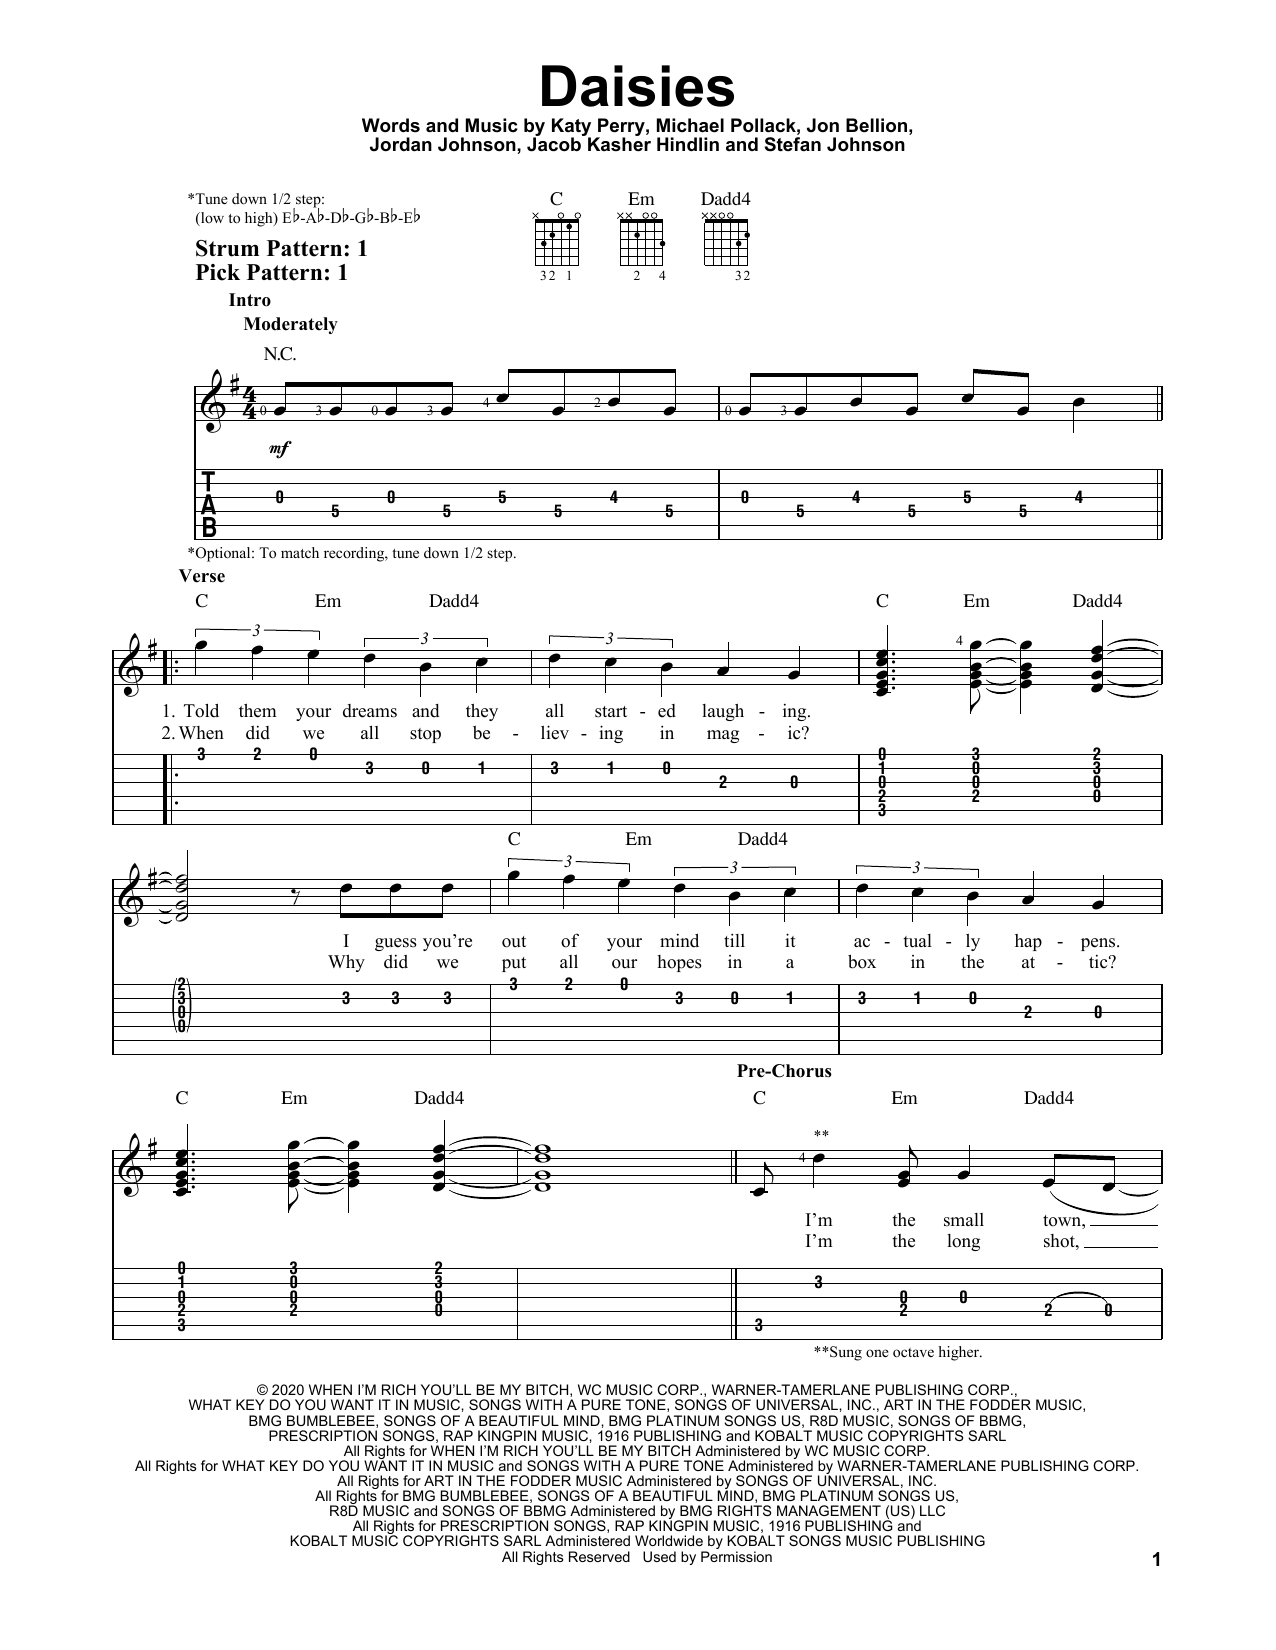 Download Katy Perry Daisies Sheet Music